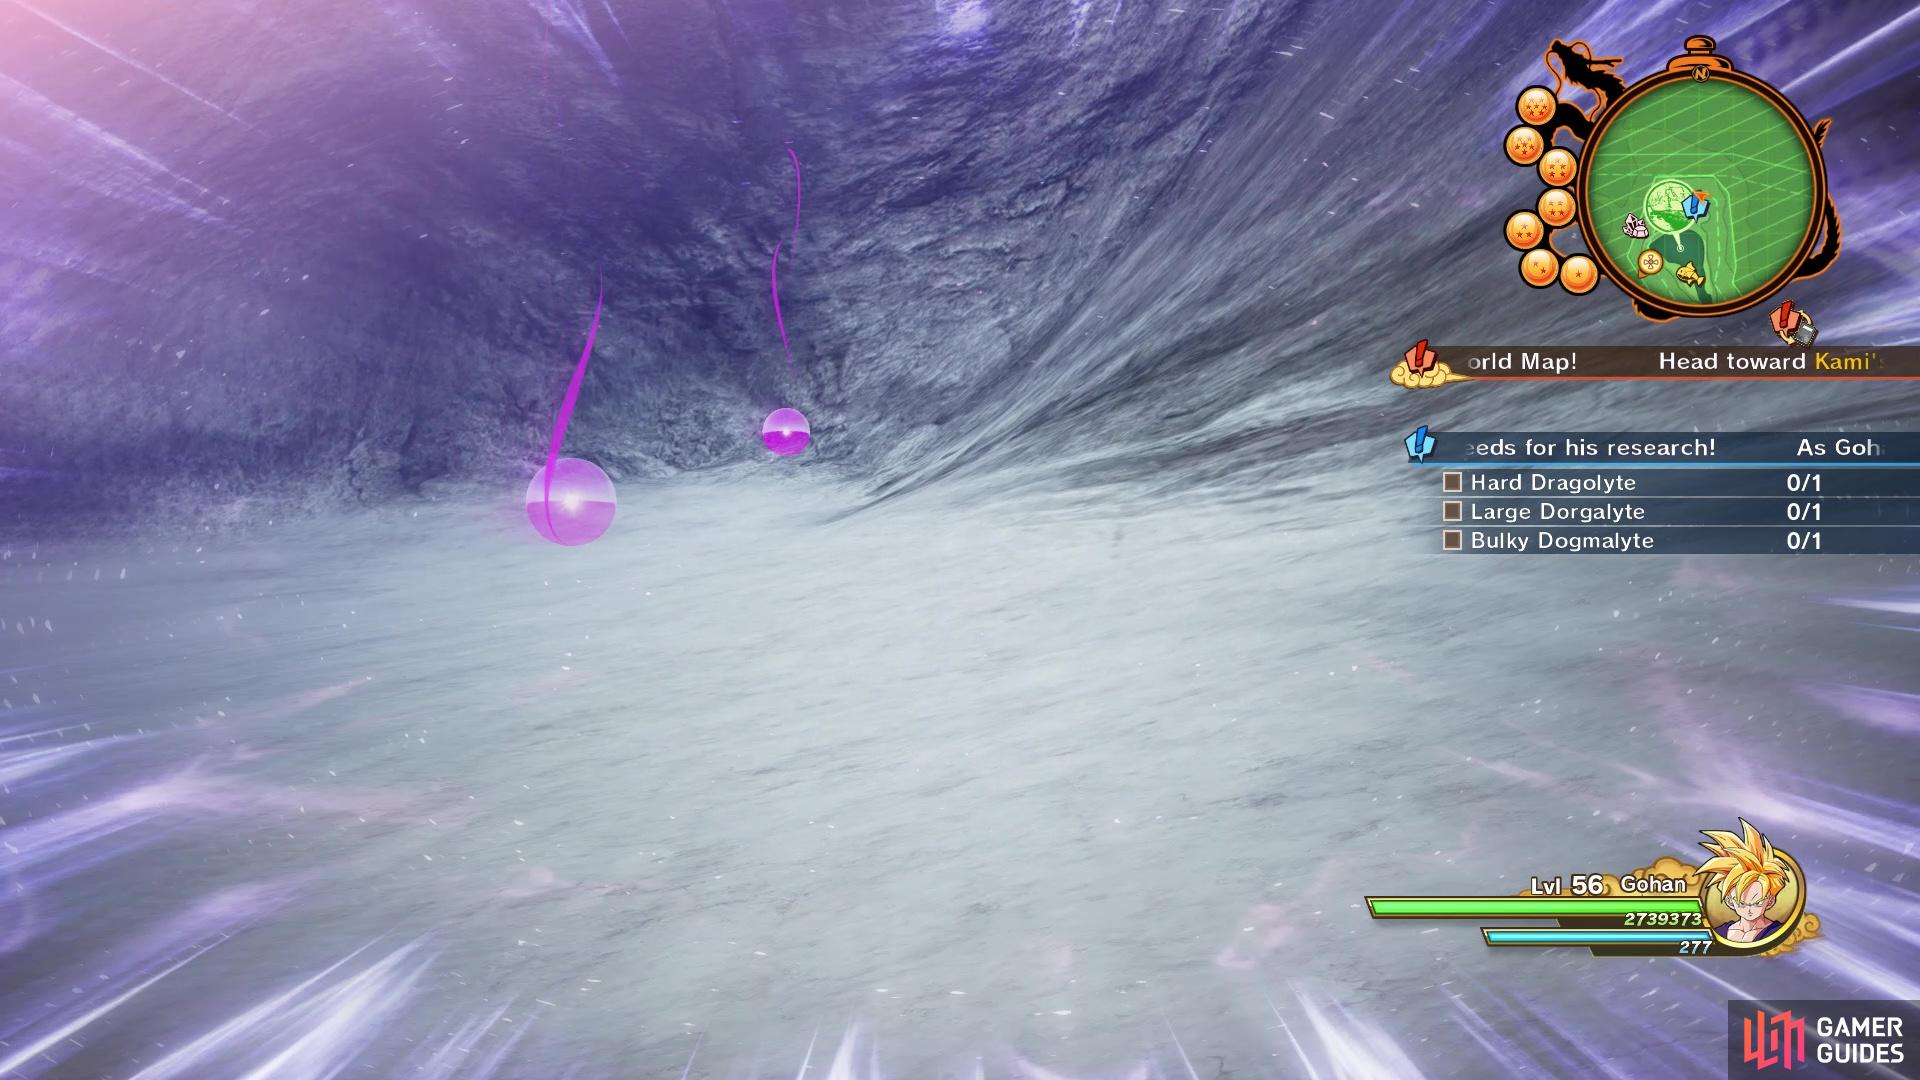 There are a good number of purple orbs scattered around